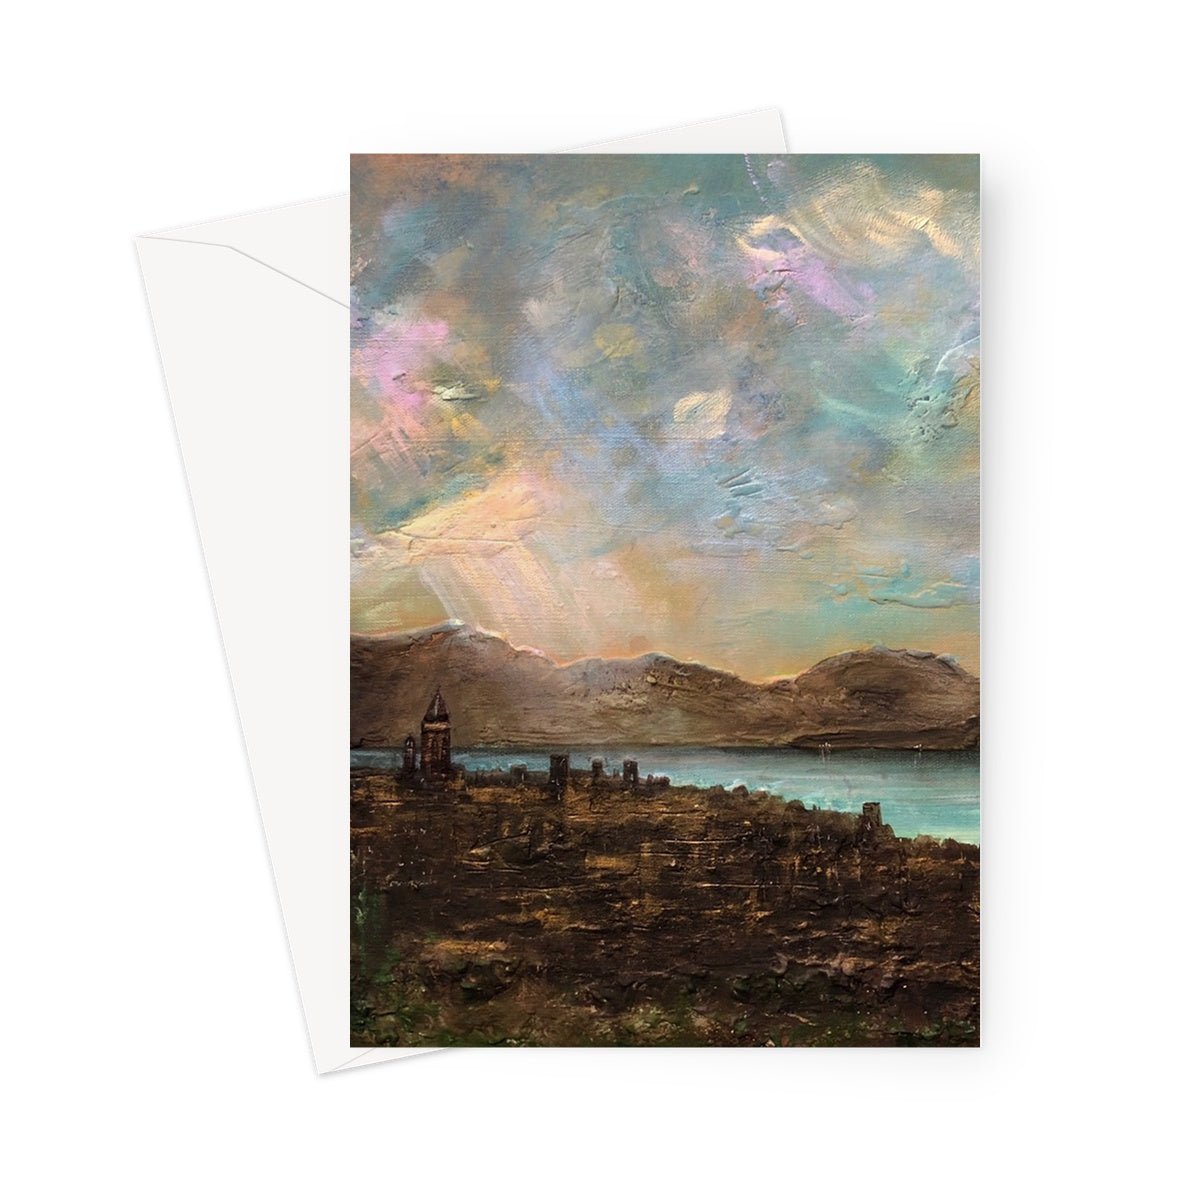 Angels Fingers Over Greenock Art Gifts Greeting Card-Greetings Cards-River Clyde Art Gallery-5"x7"-1 Card-Paintings, Prints, Homeware, Art Gifts From Scotland By Scottish Artist Kevin Hunter